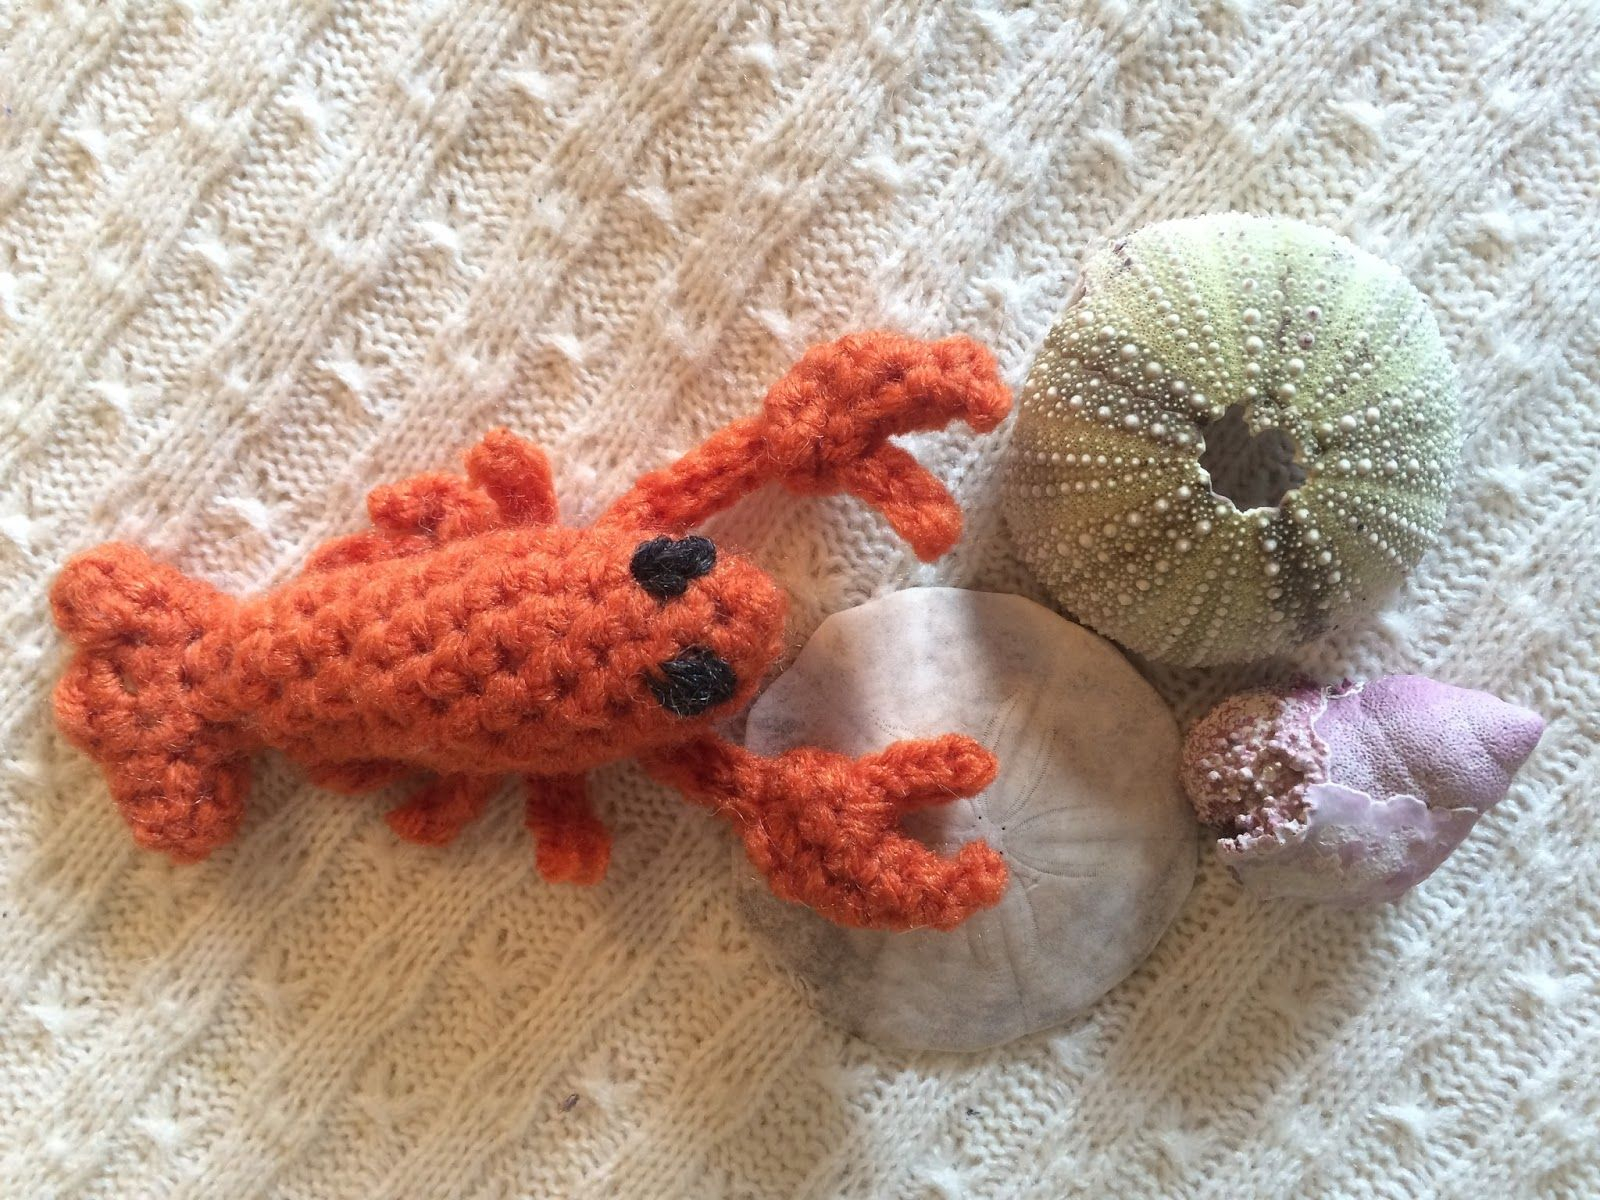 Crochet Lobster Pattern Sweet Sea Creatures Crochet Super Small And Adorable Lobster